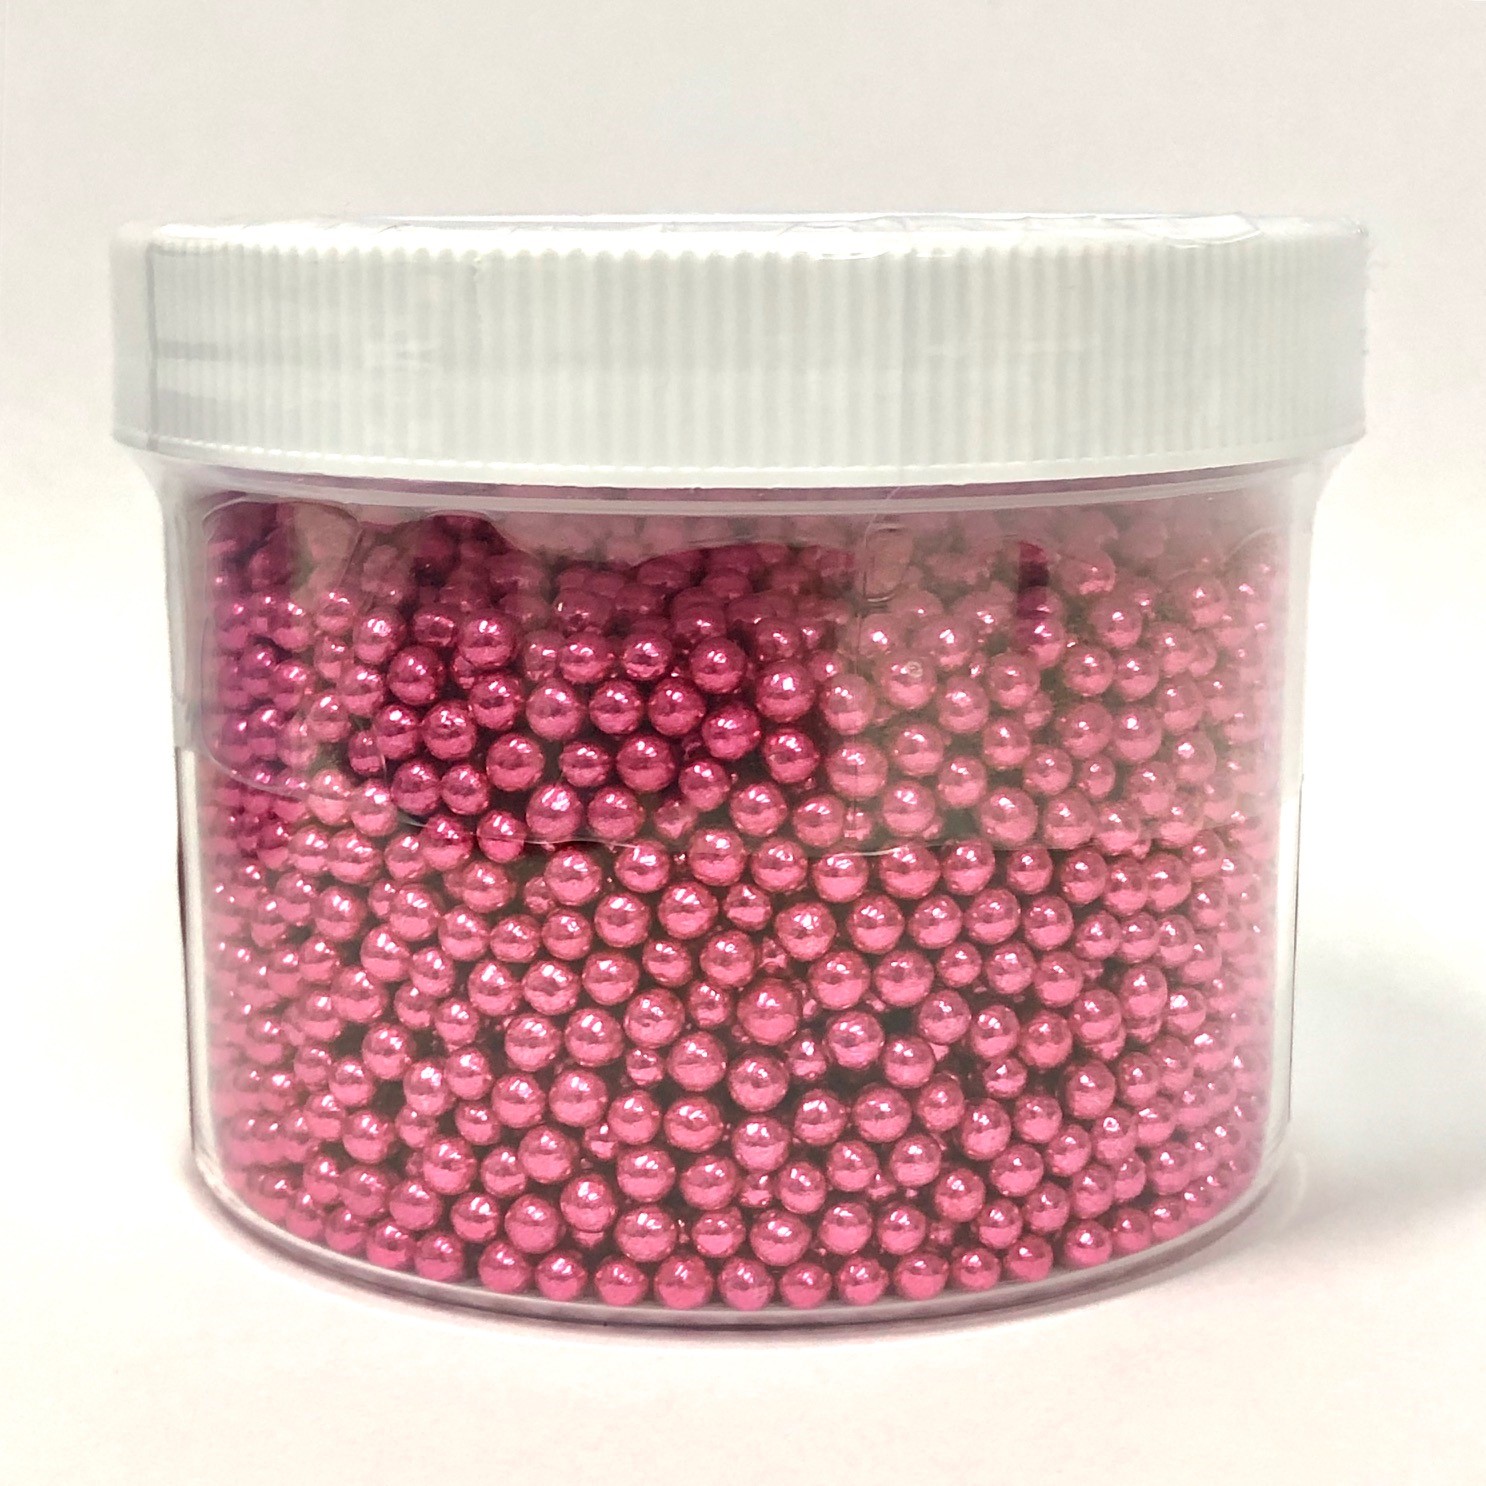 Dragee Metallic Fuchsia 4mm - 250g by Confectioners Choice